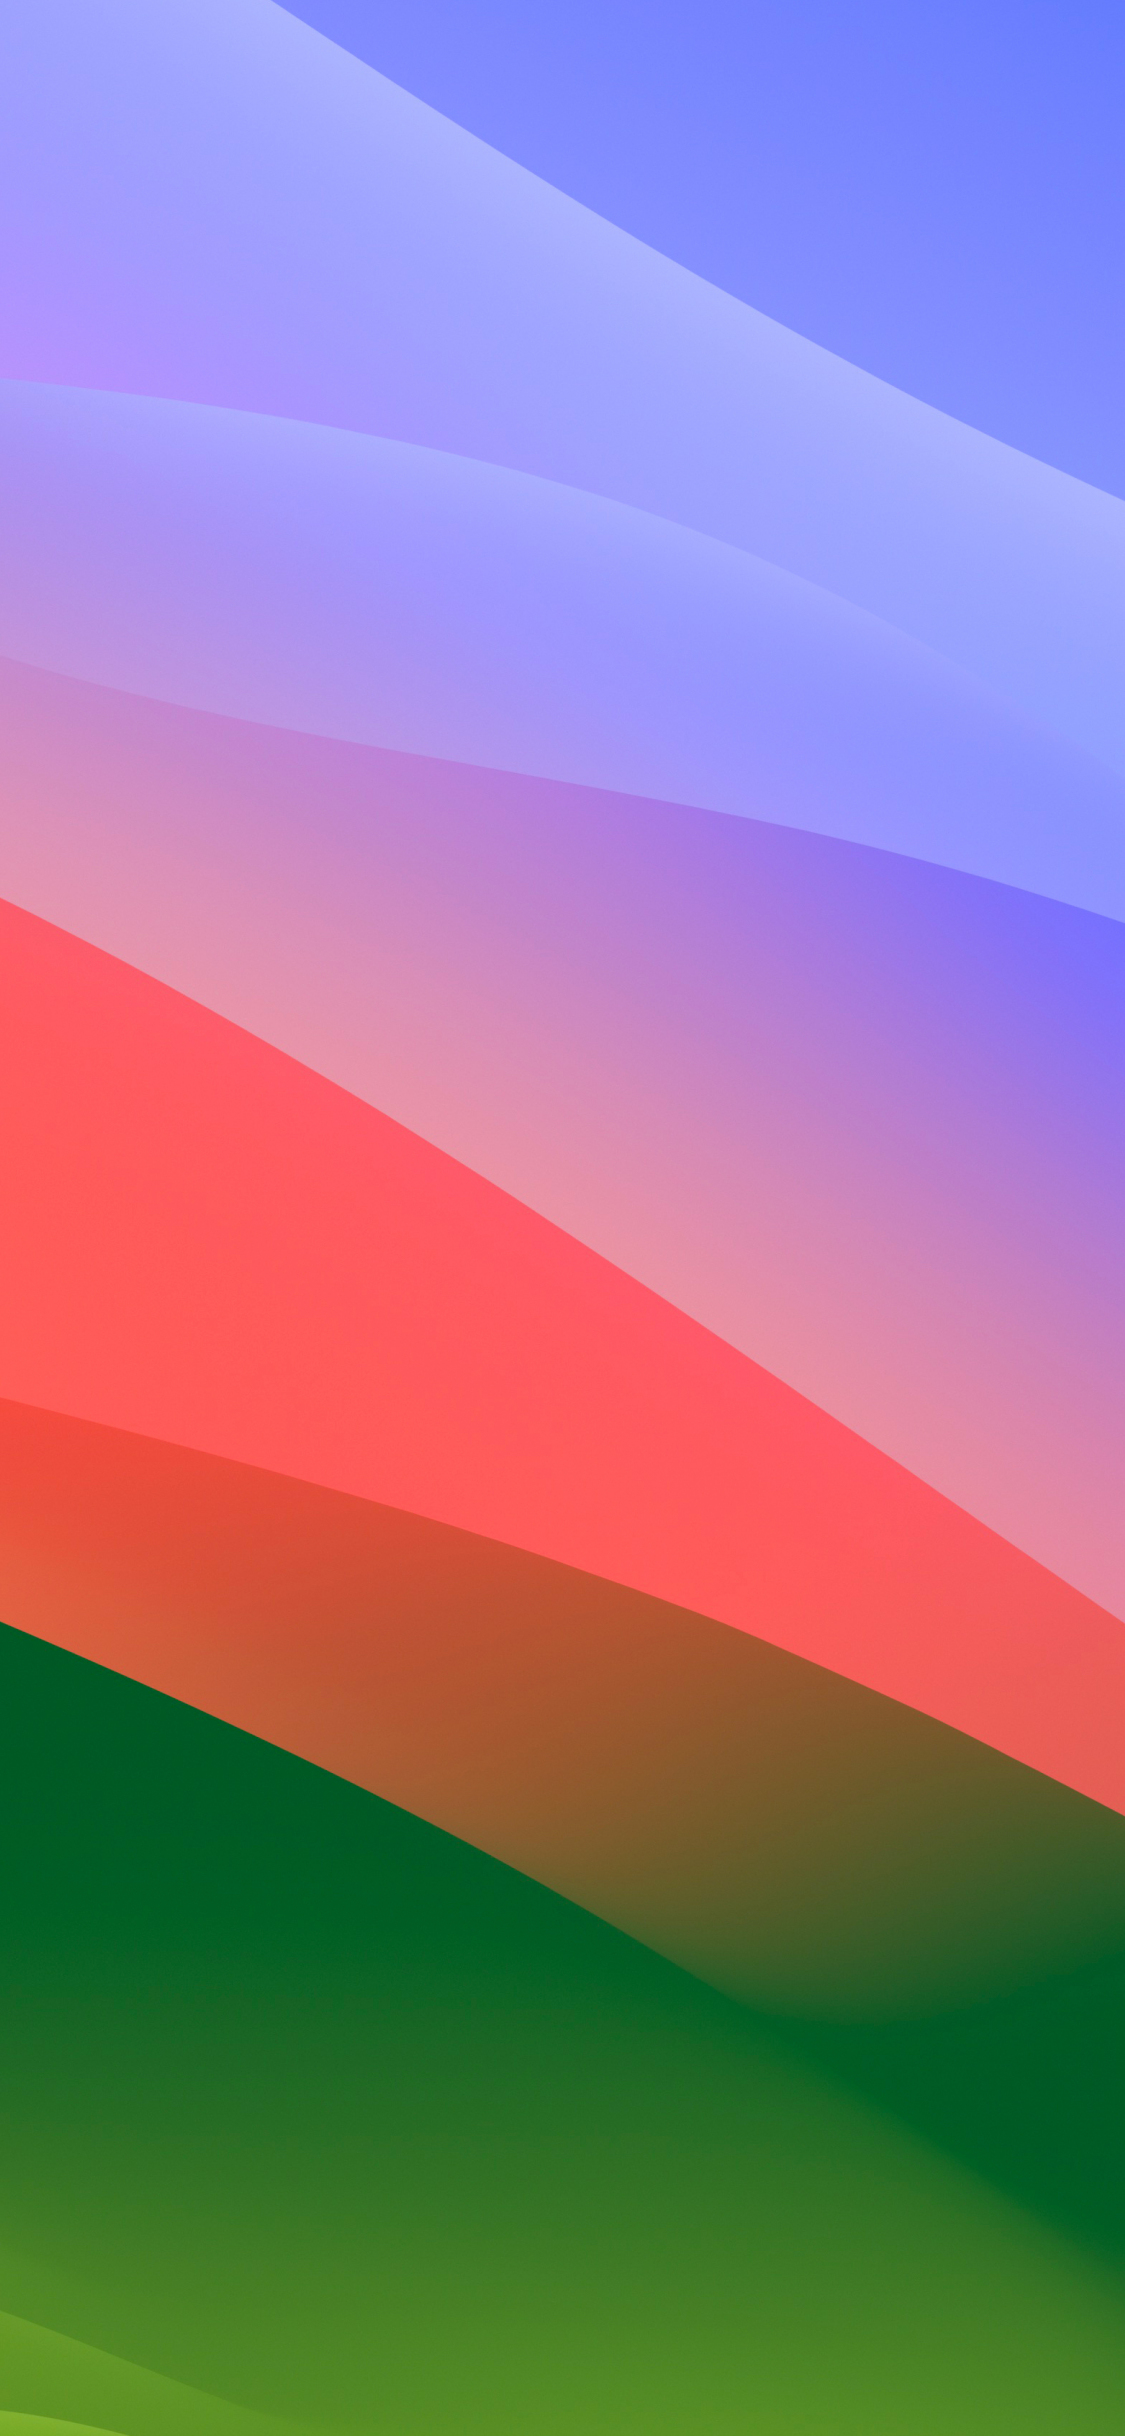 MacOS Sonoma, colorful waves, stock photo, 1125x2436 wallpaper